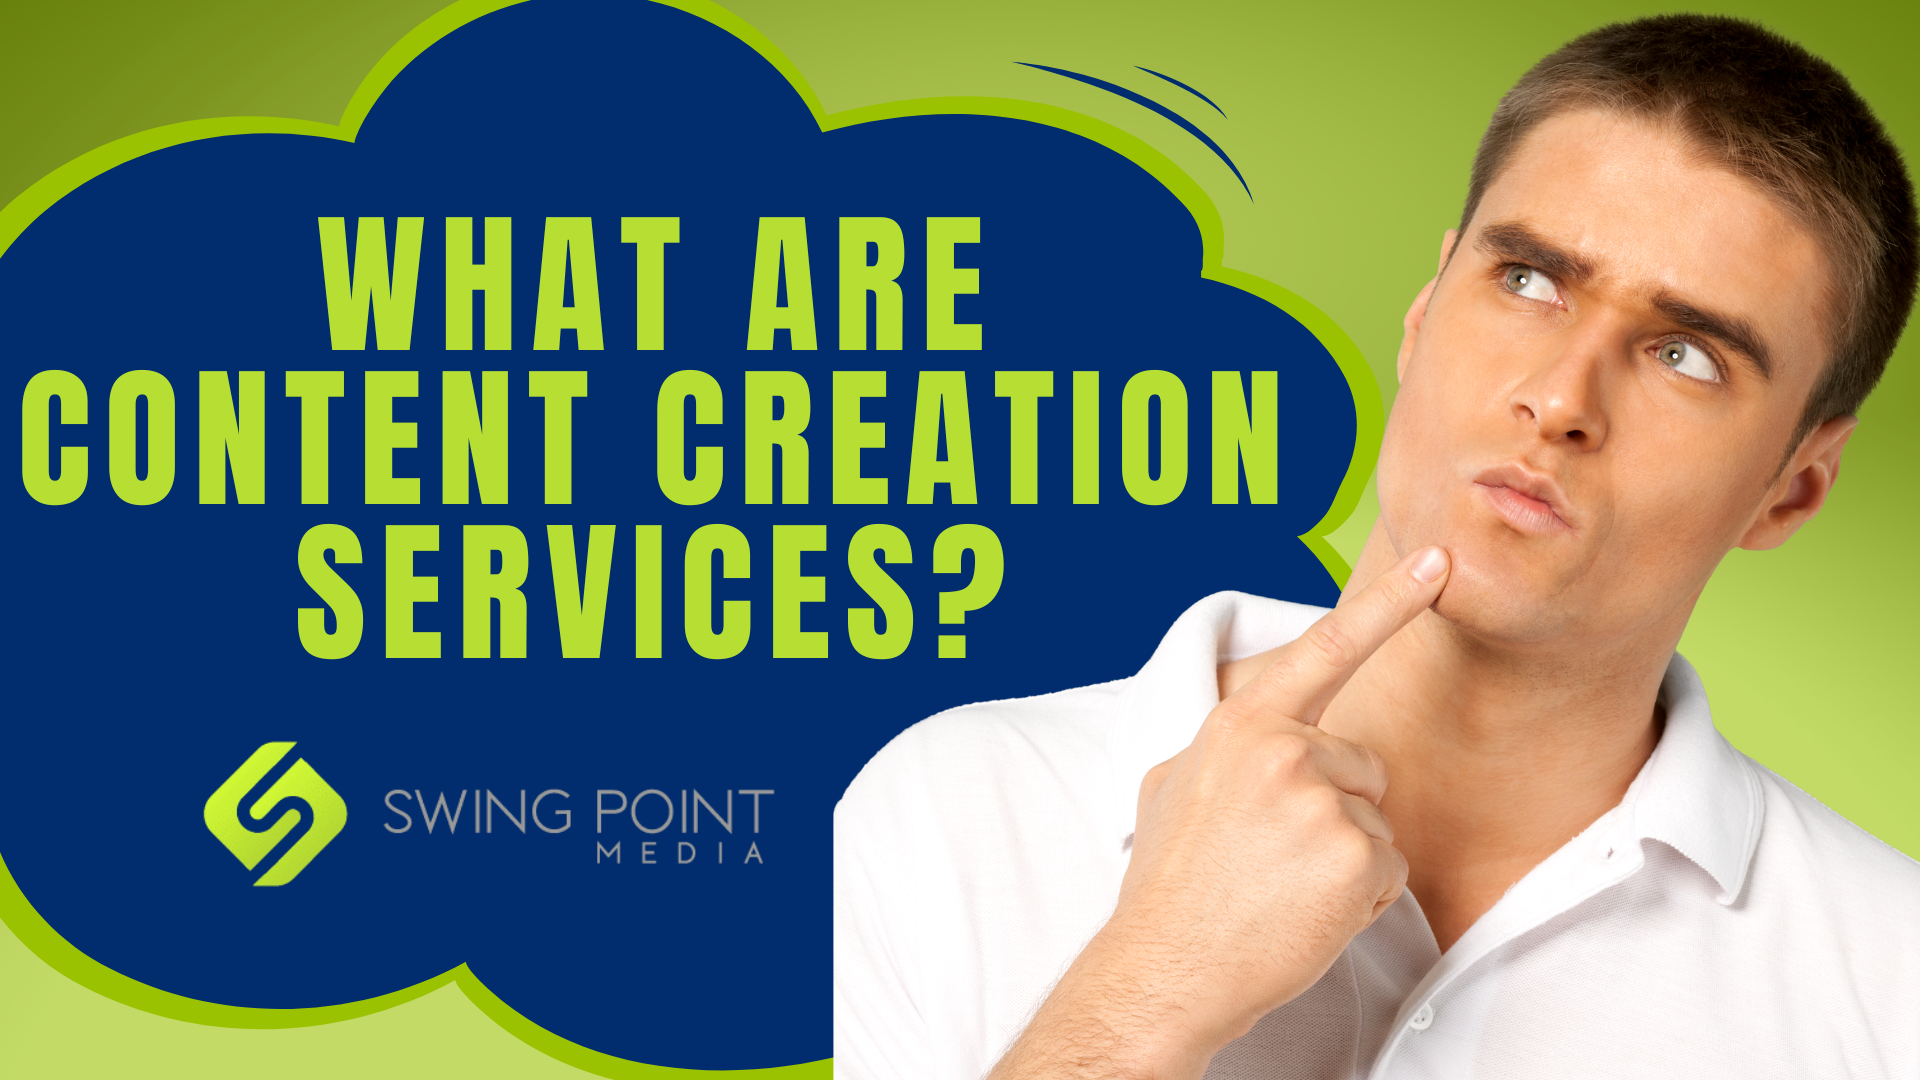 What are content creation services?